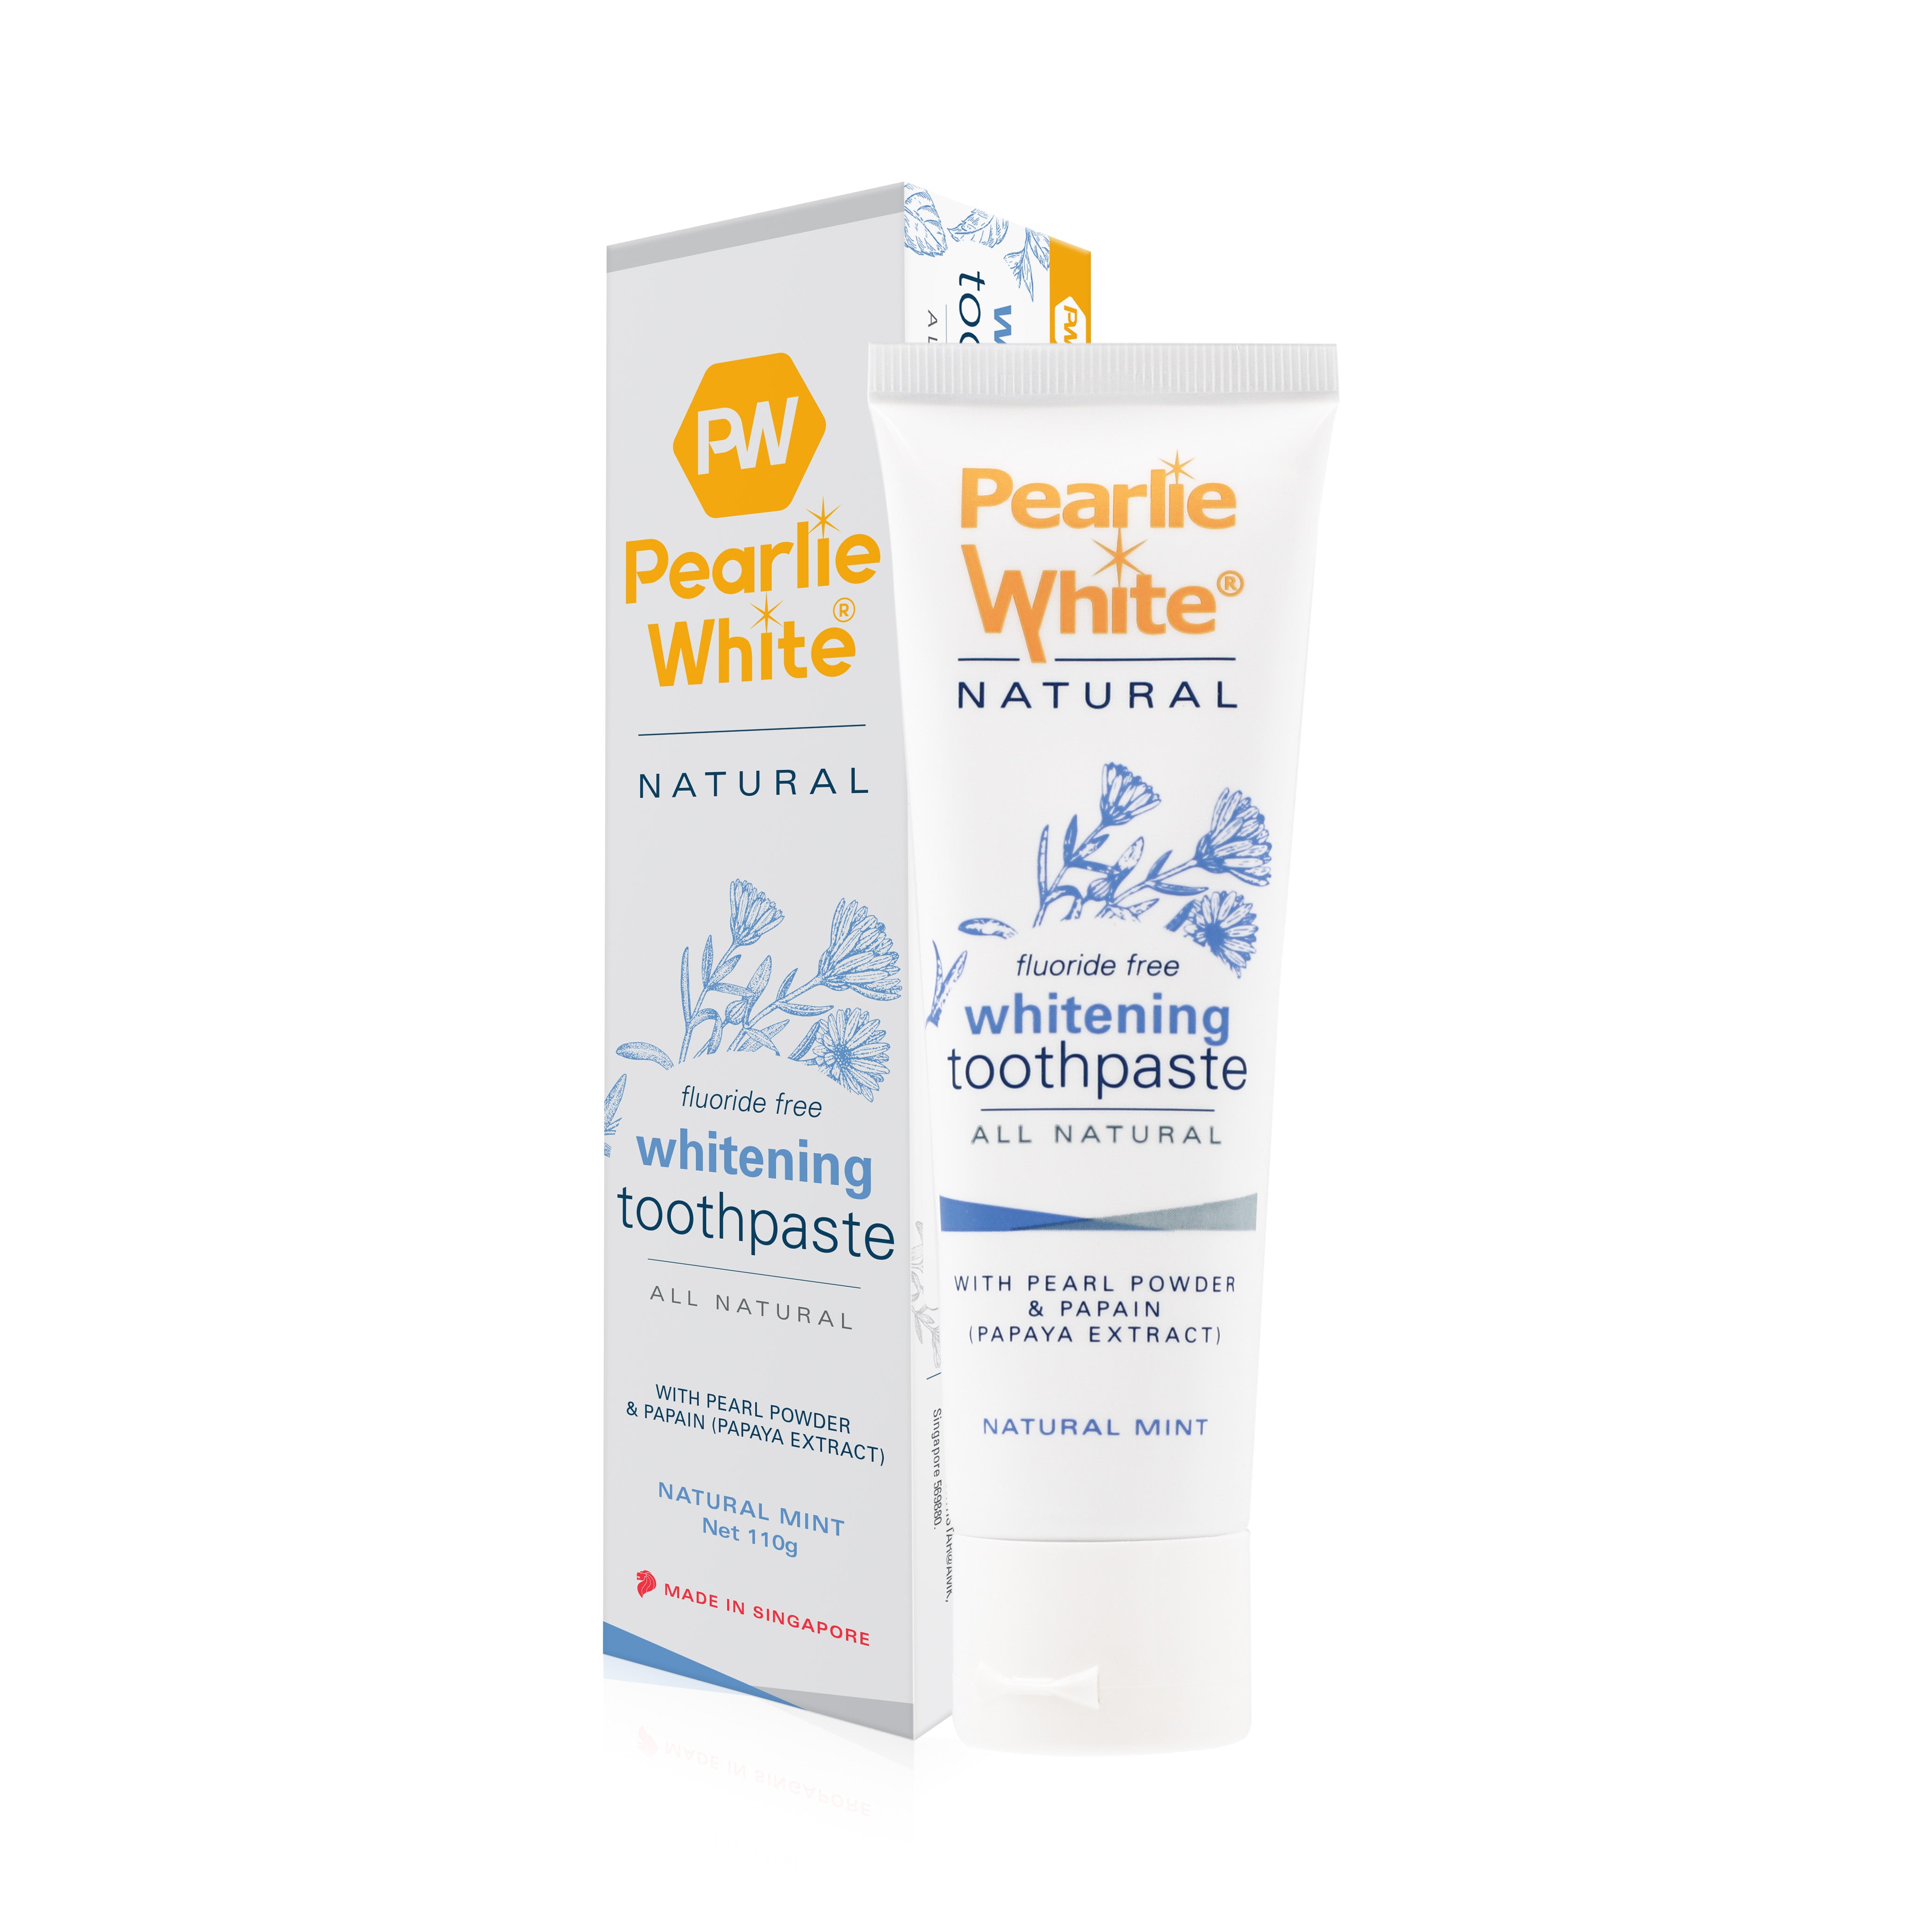 All Natural Whitening Toothpaste 110gm